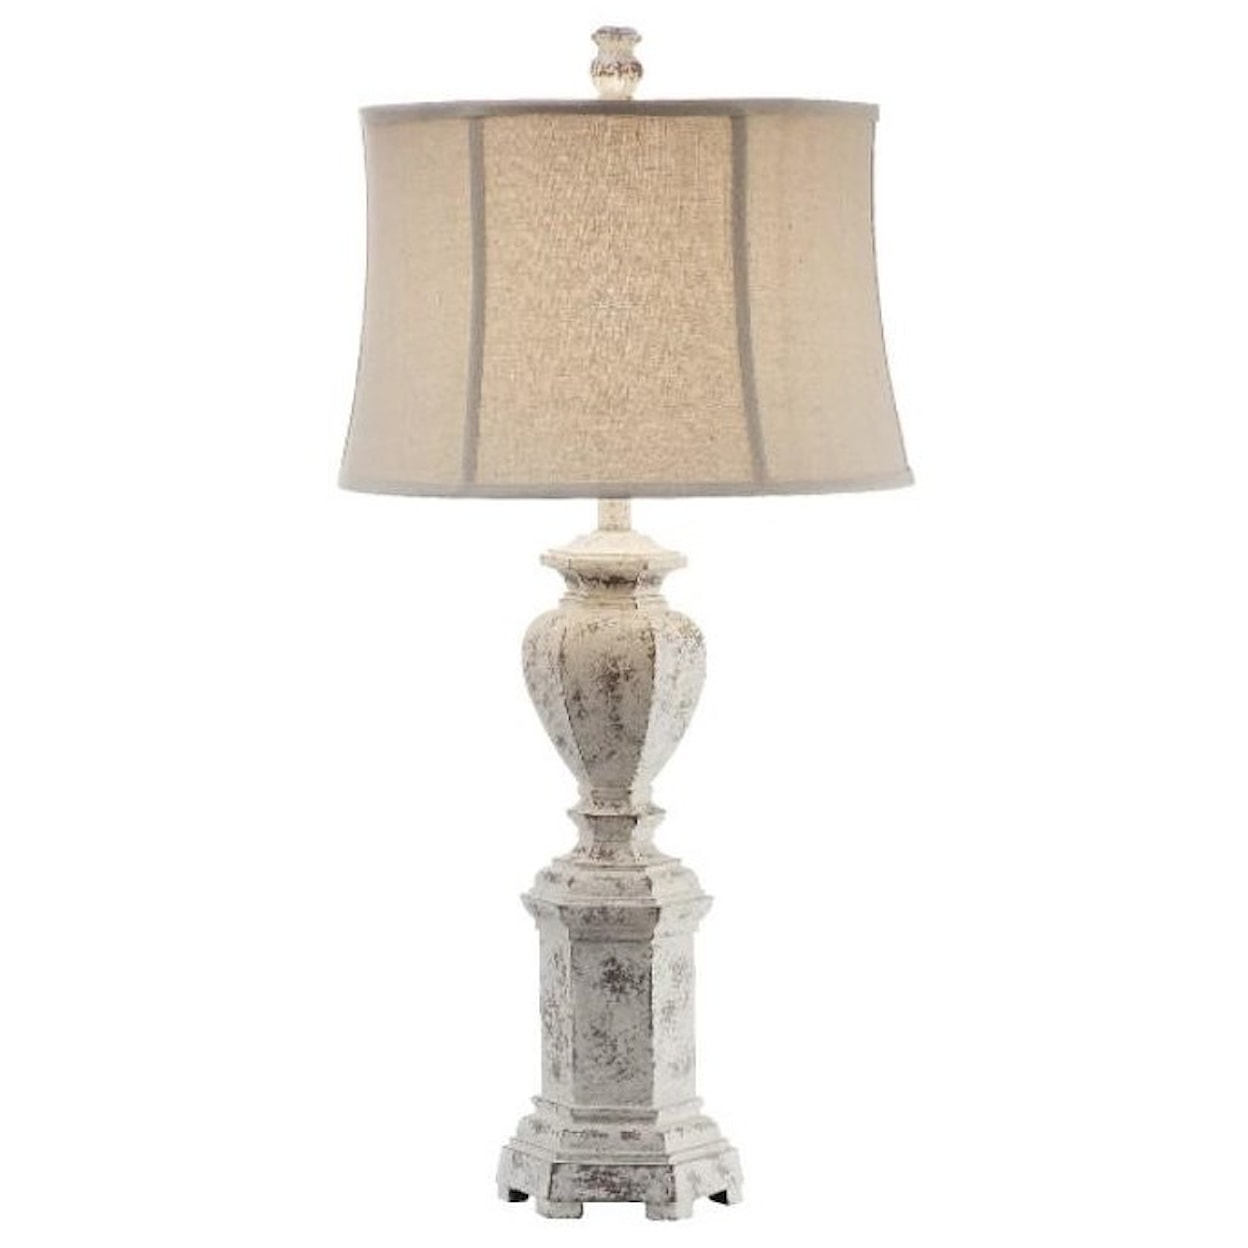 Crestview Collection Lighting Stanton Table Lamp